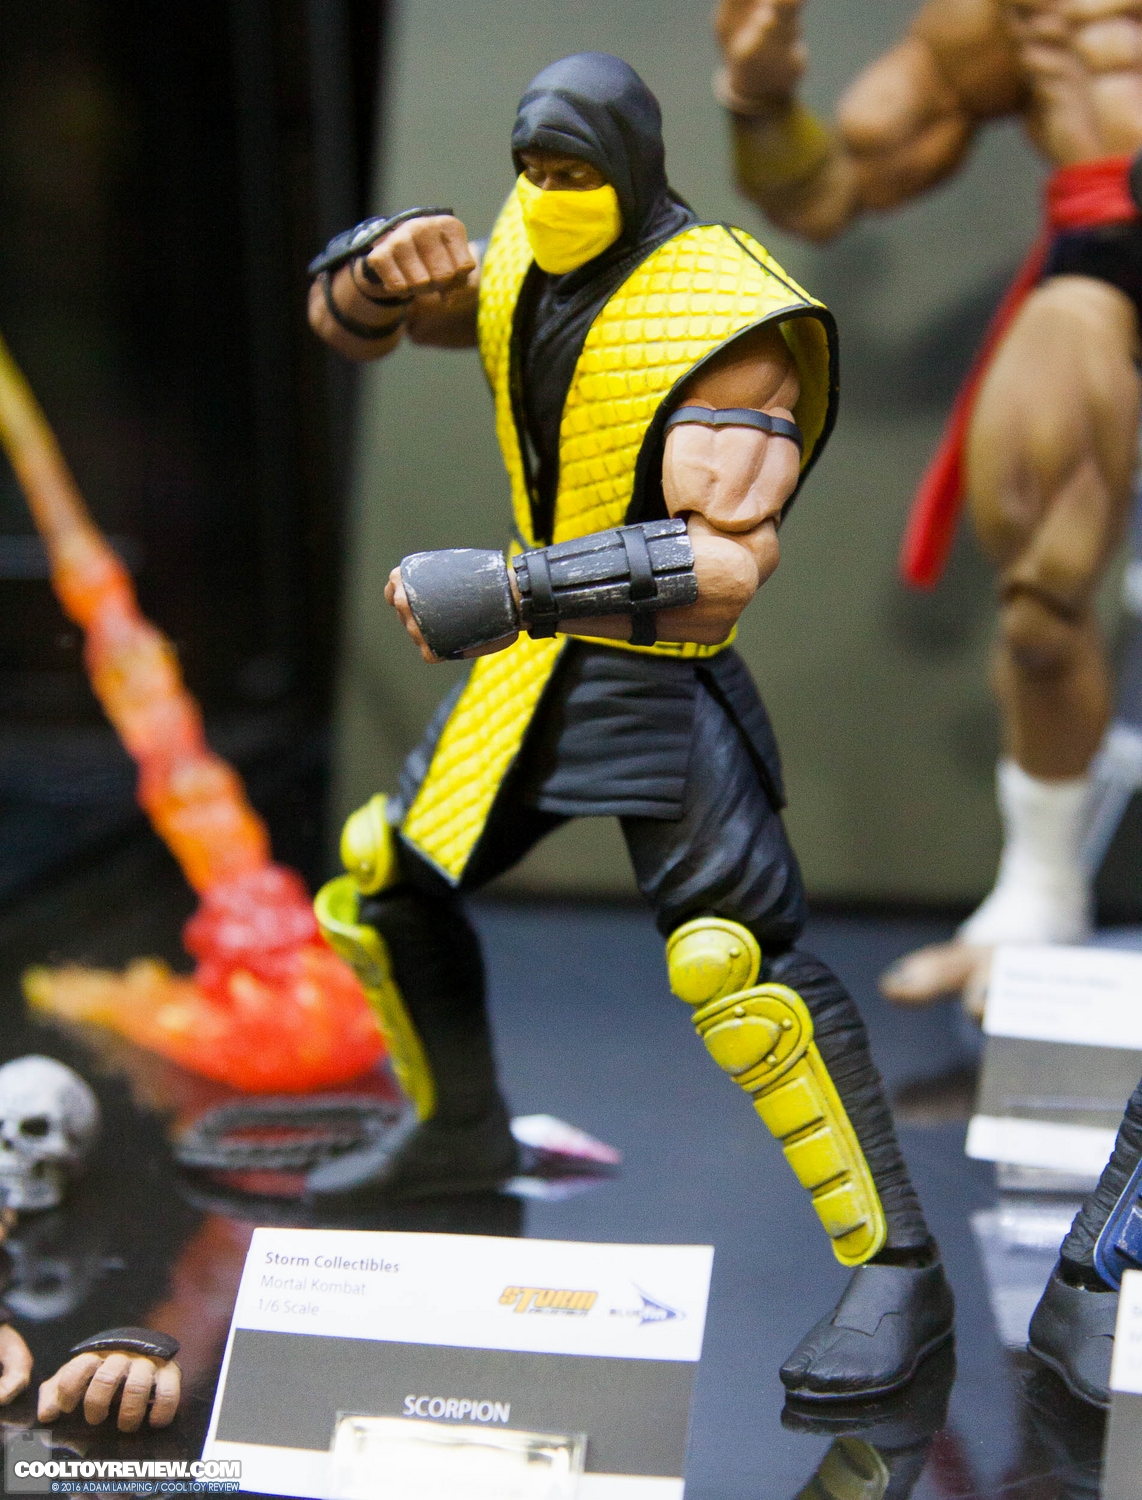 san-diego-comic-con-storm-collectibles-booth-017.jpg